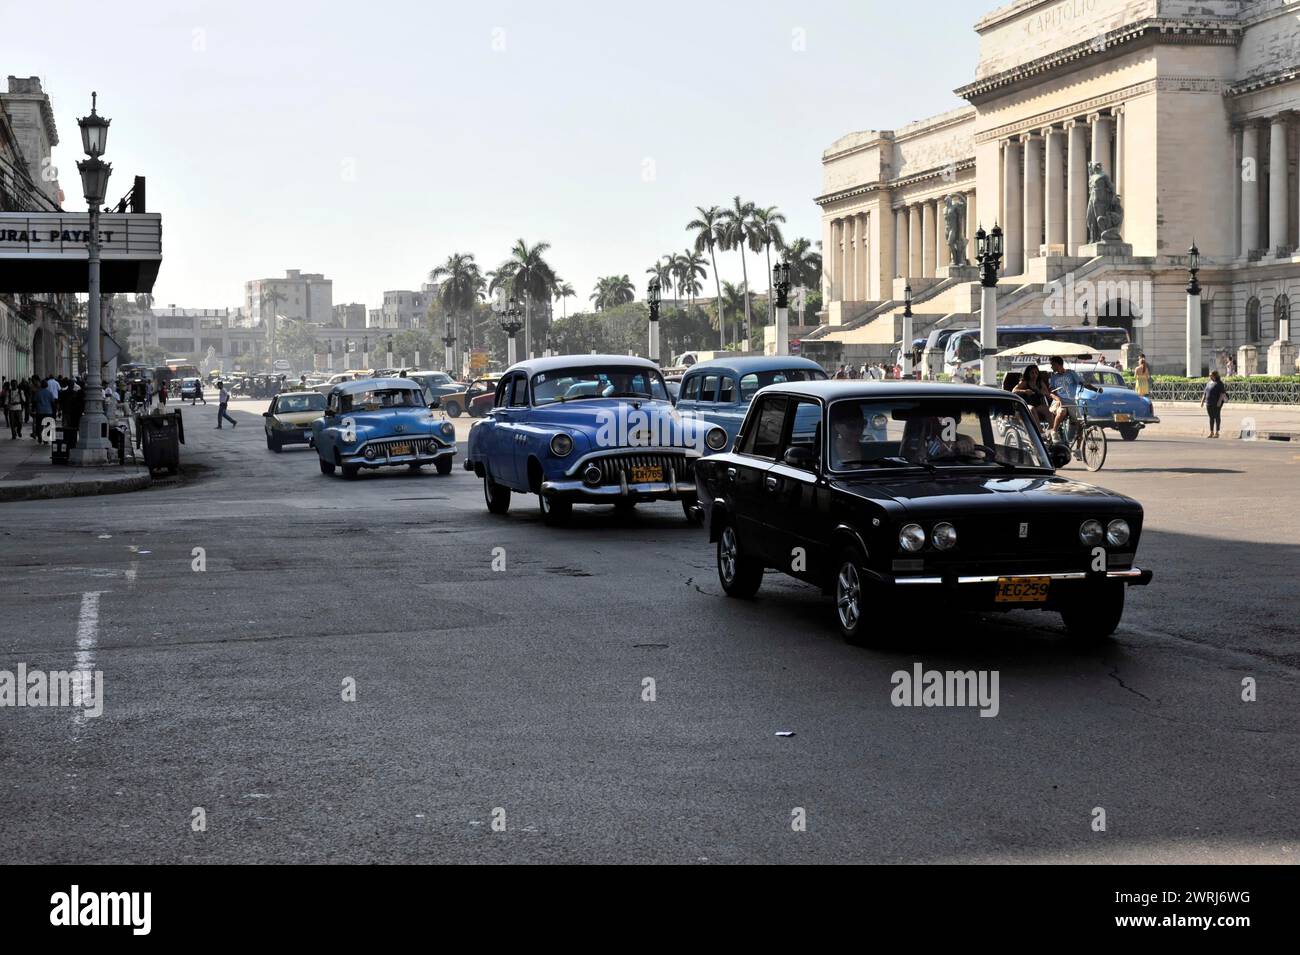 Vintage car in city traffic in front of historic capitol-style building, Havana, Cuba, Central America Stock Photo